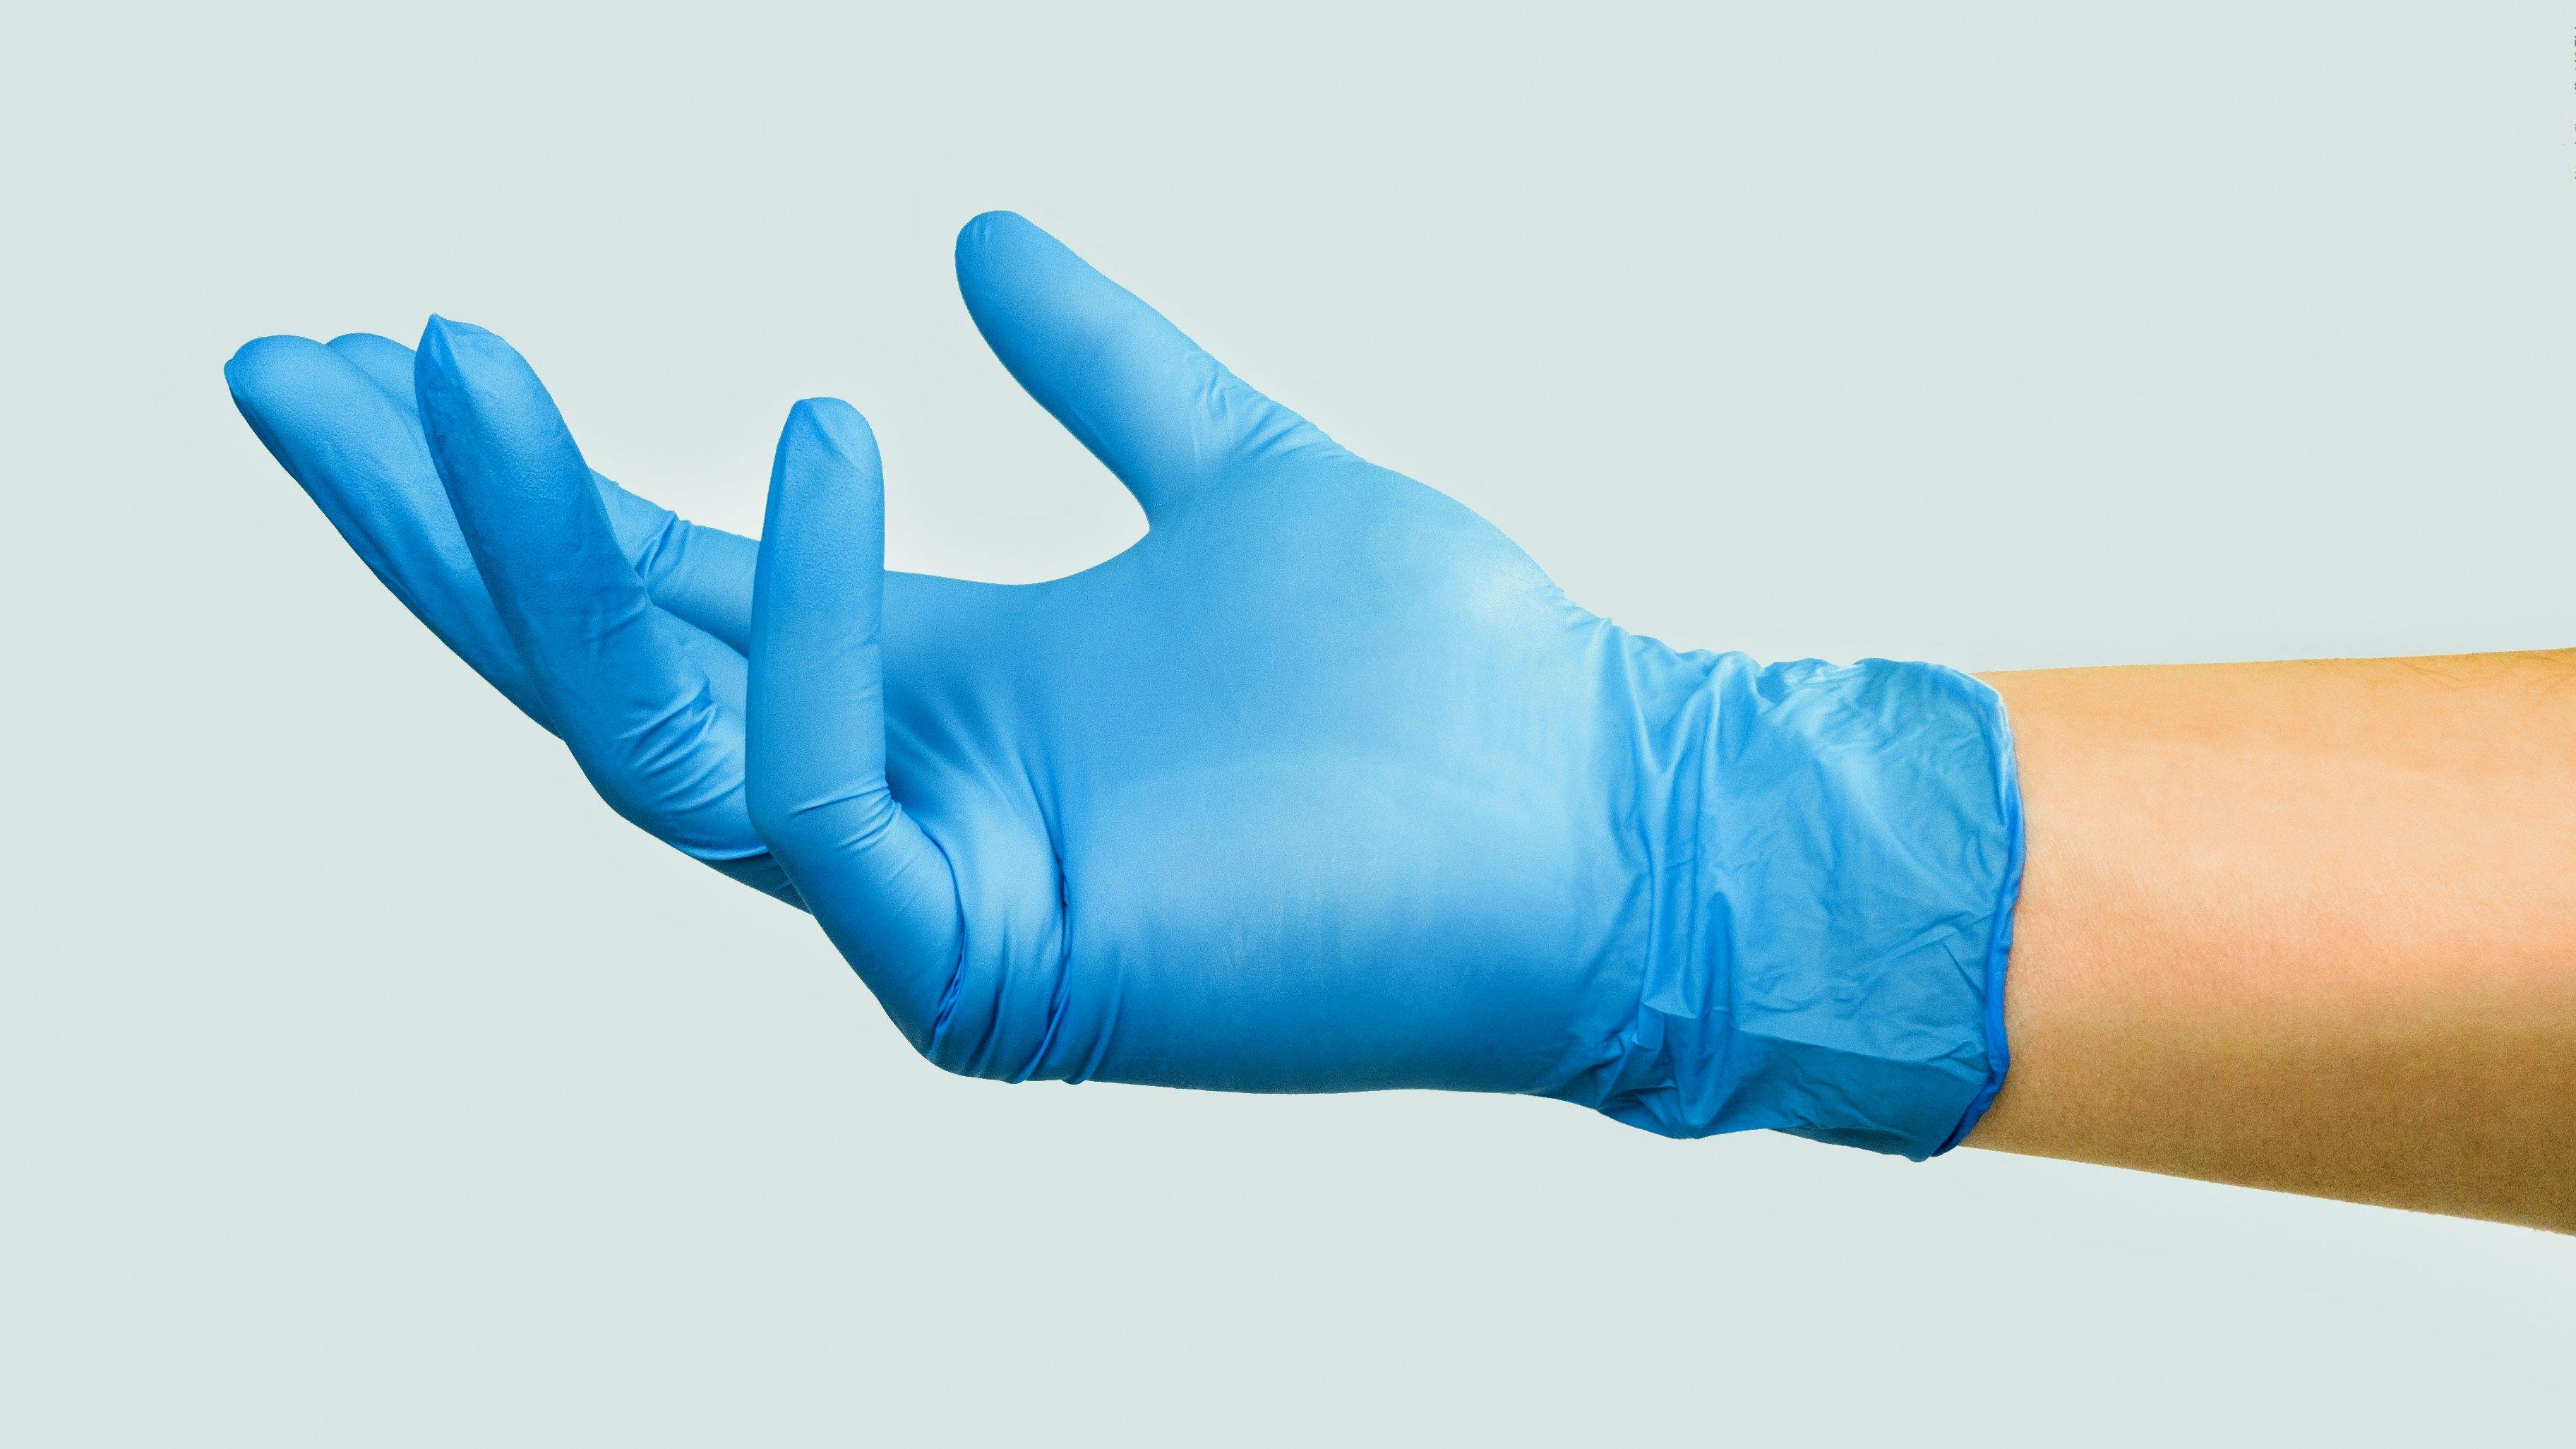 Protexis™ PI Blue with Neu-Thera™ Surgical Gloves from Cardinal Health